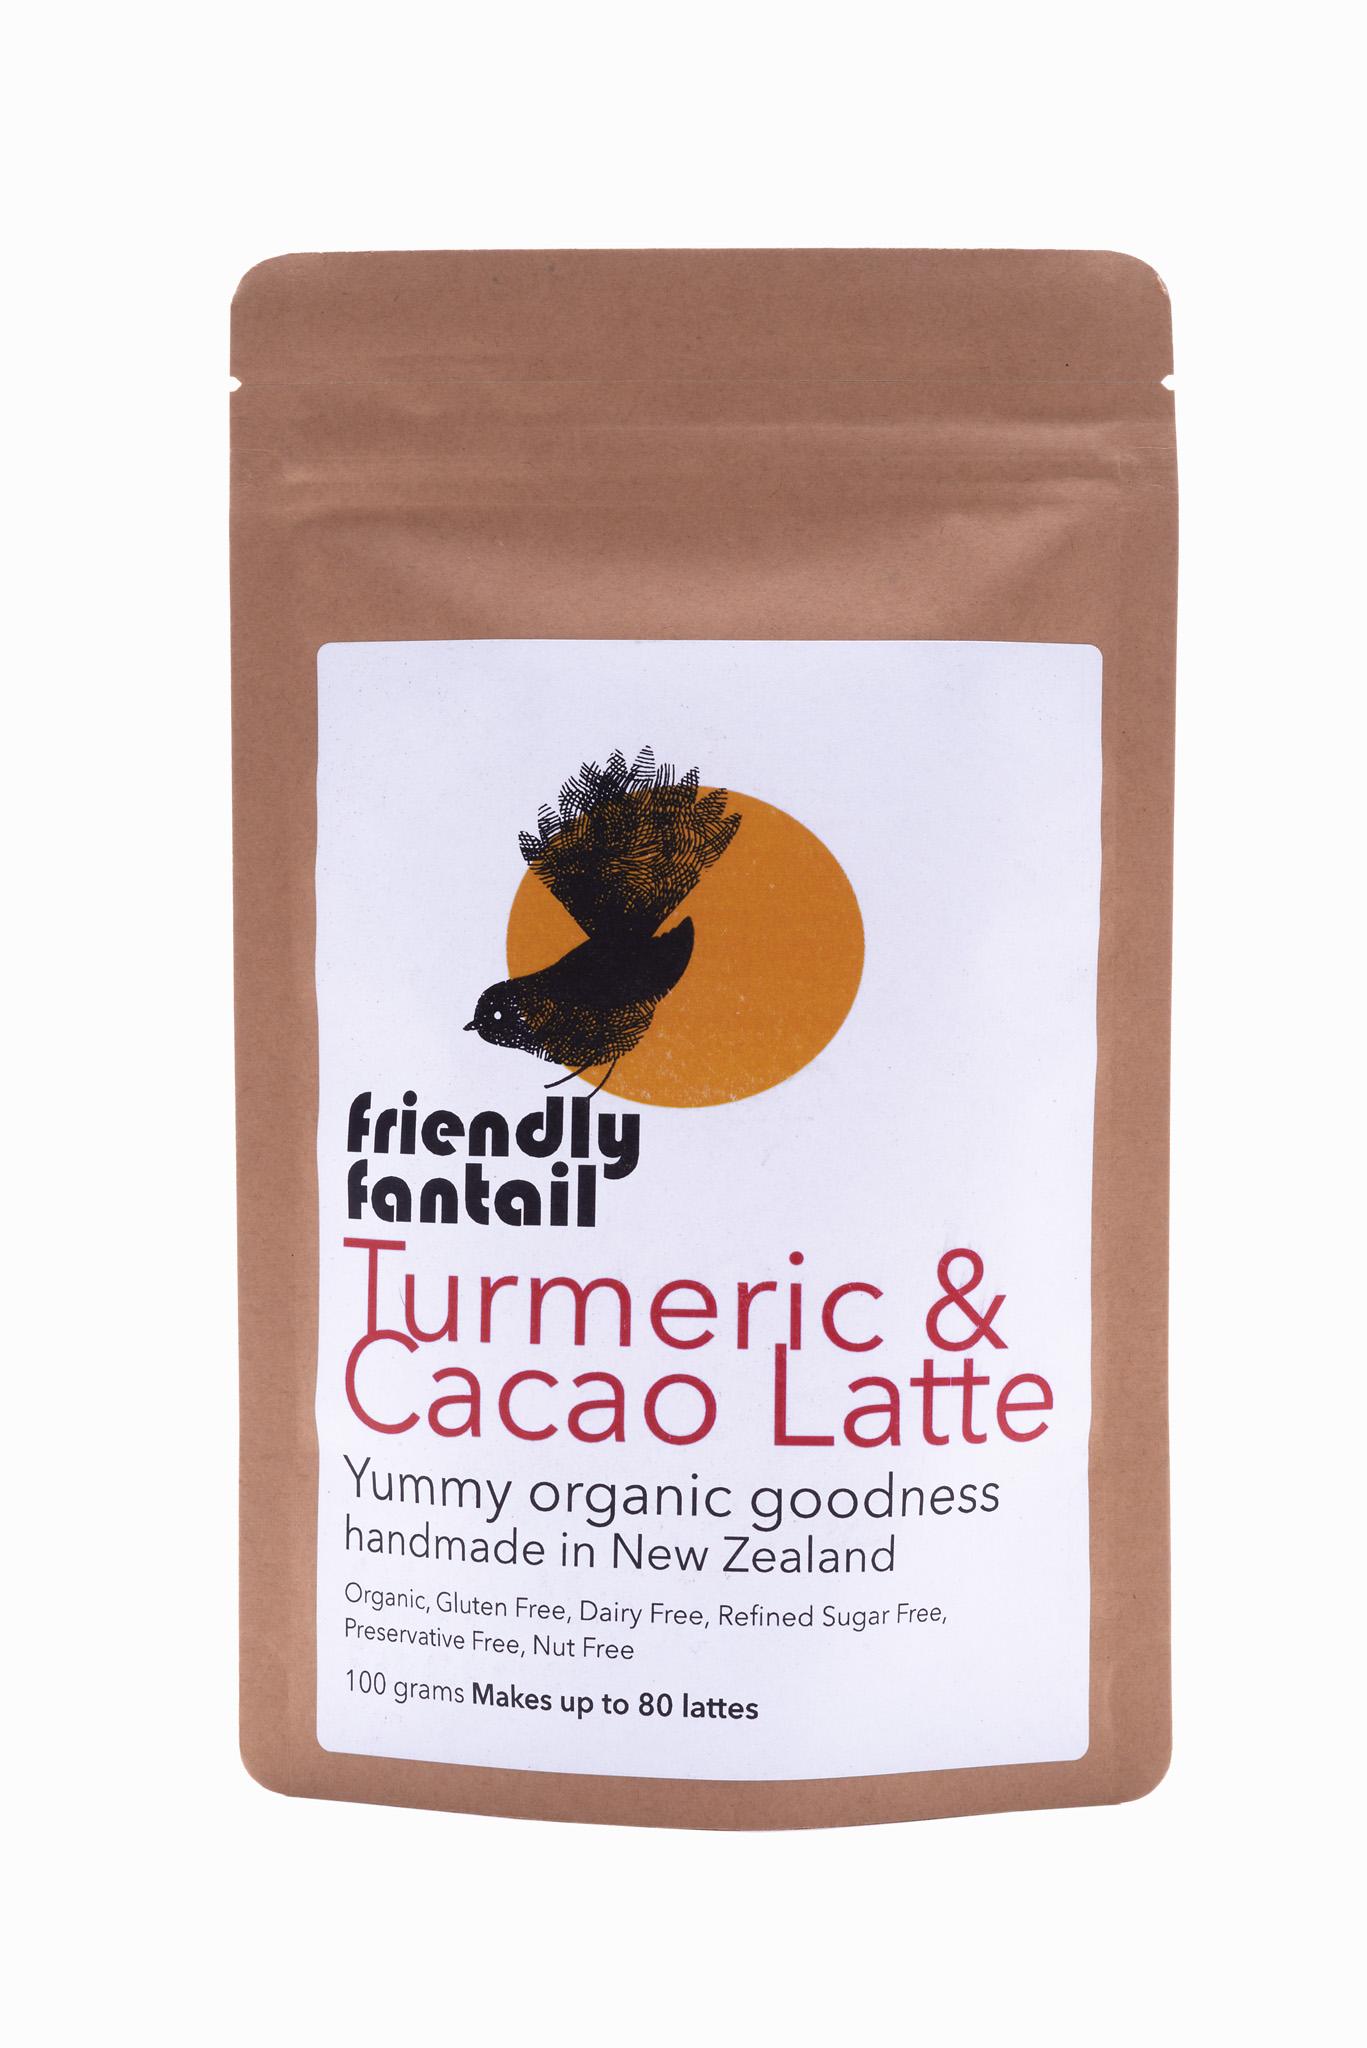 product image for Friendly Fantail Organic Turmeric & Cacao Latte spice mix